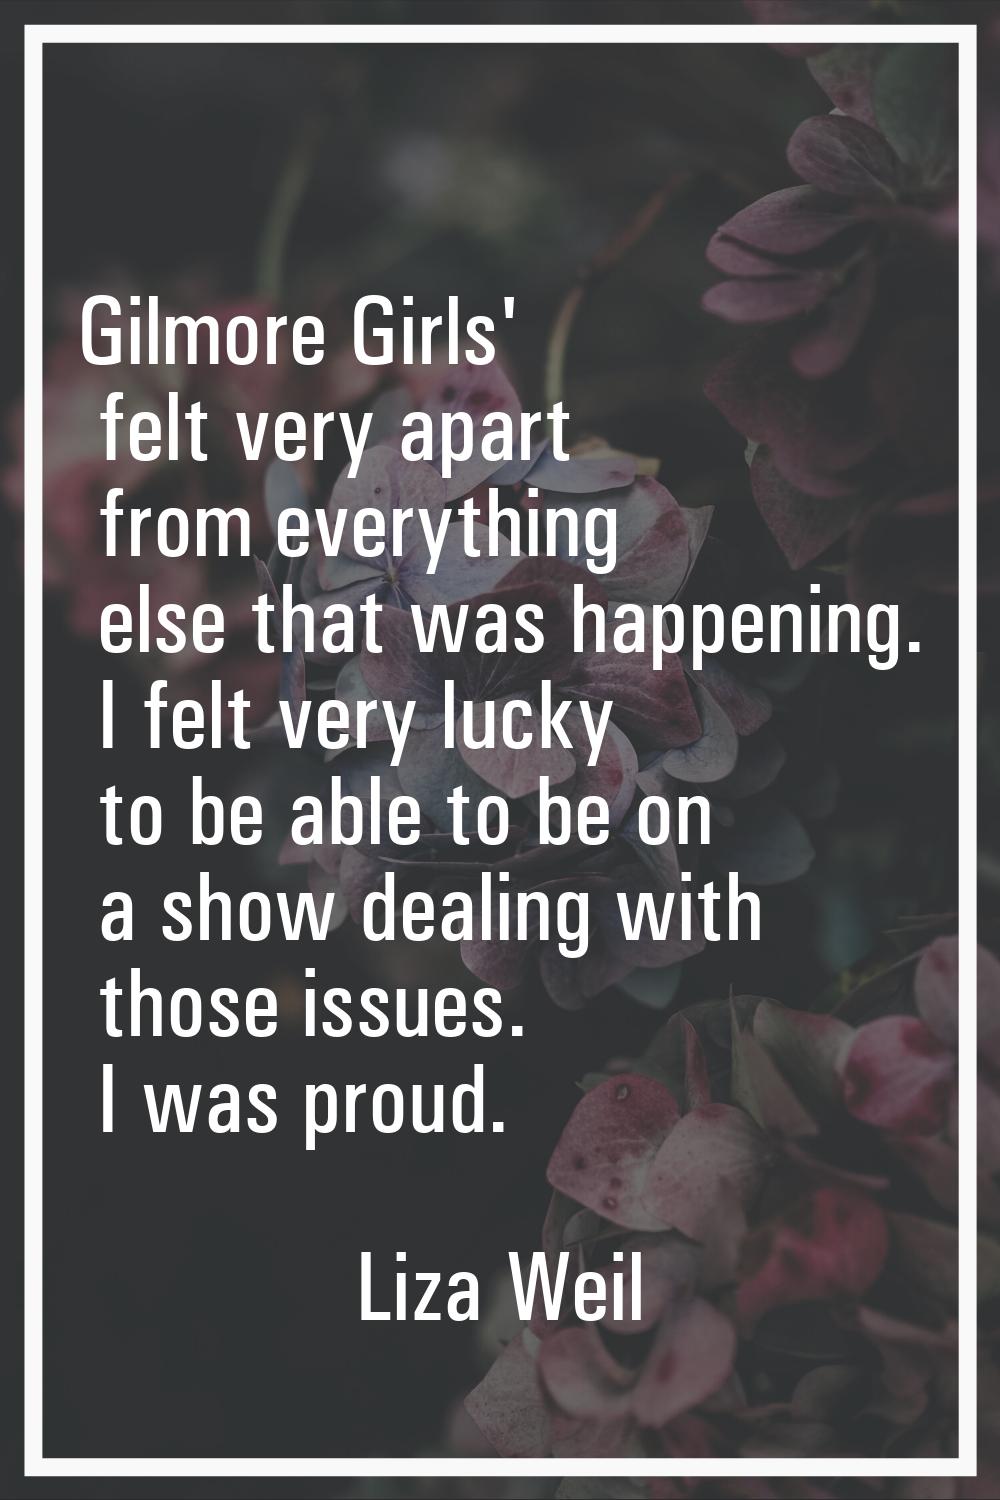 Gilmore Girls' felt very apart from everything else that was happening. I felt very lucky to be abl